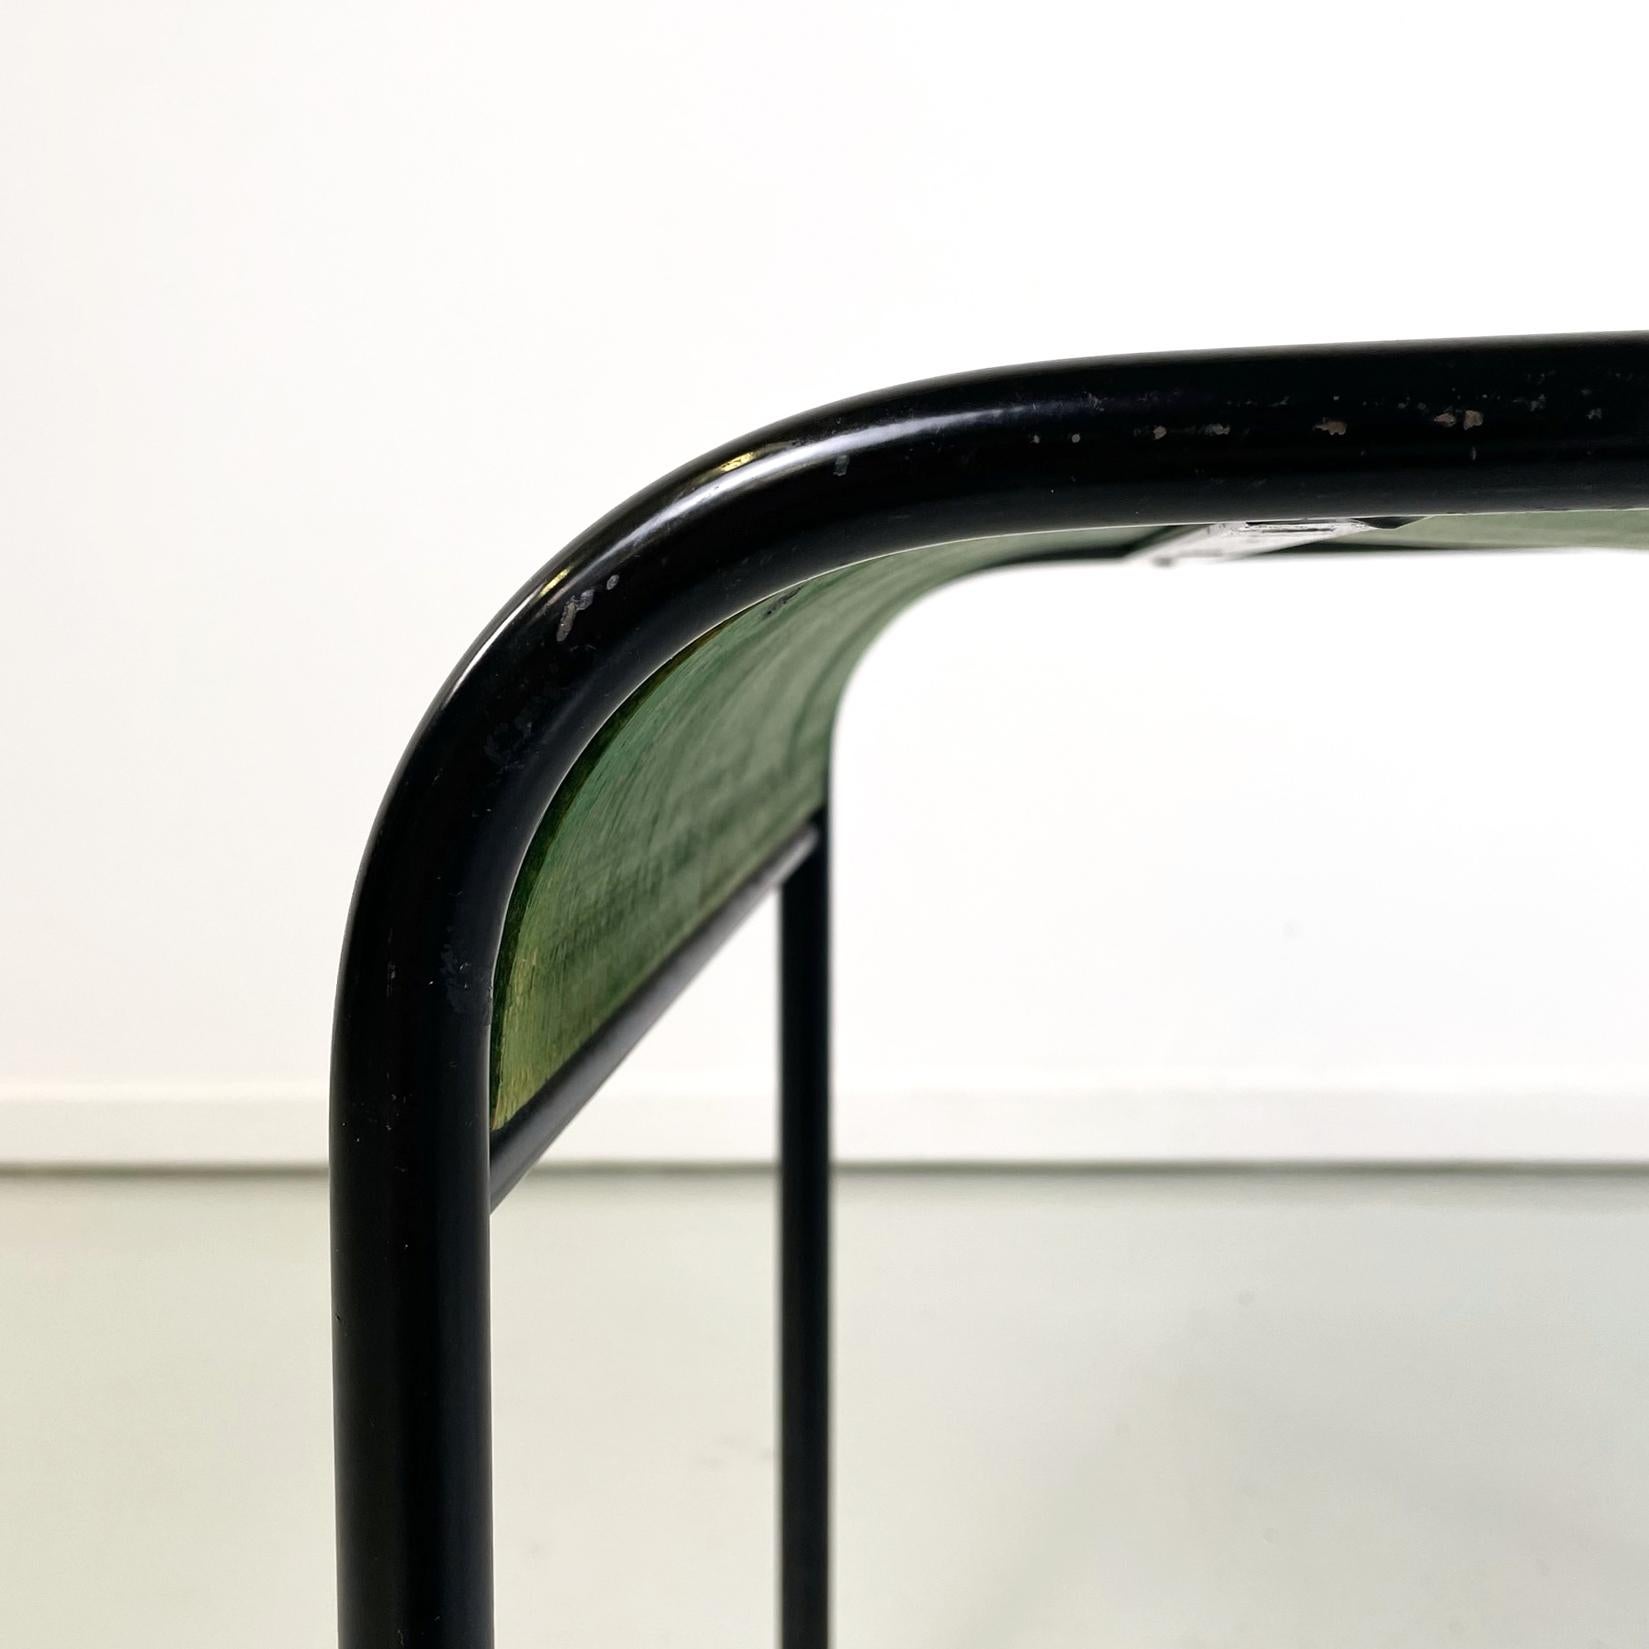 Italian modern Green wood black metal chair Kim by De Lucchi for Memphis, 1980s For Sale 4